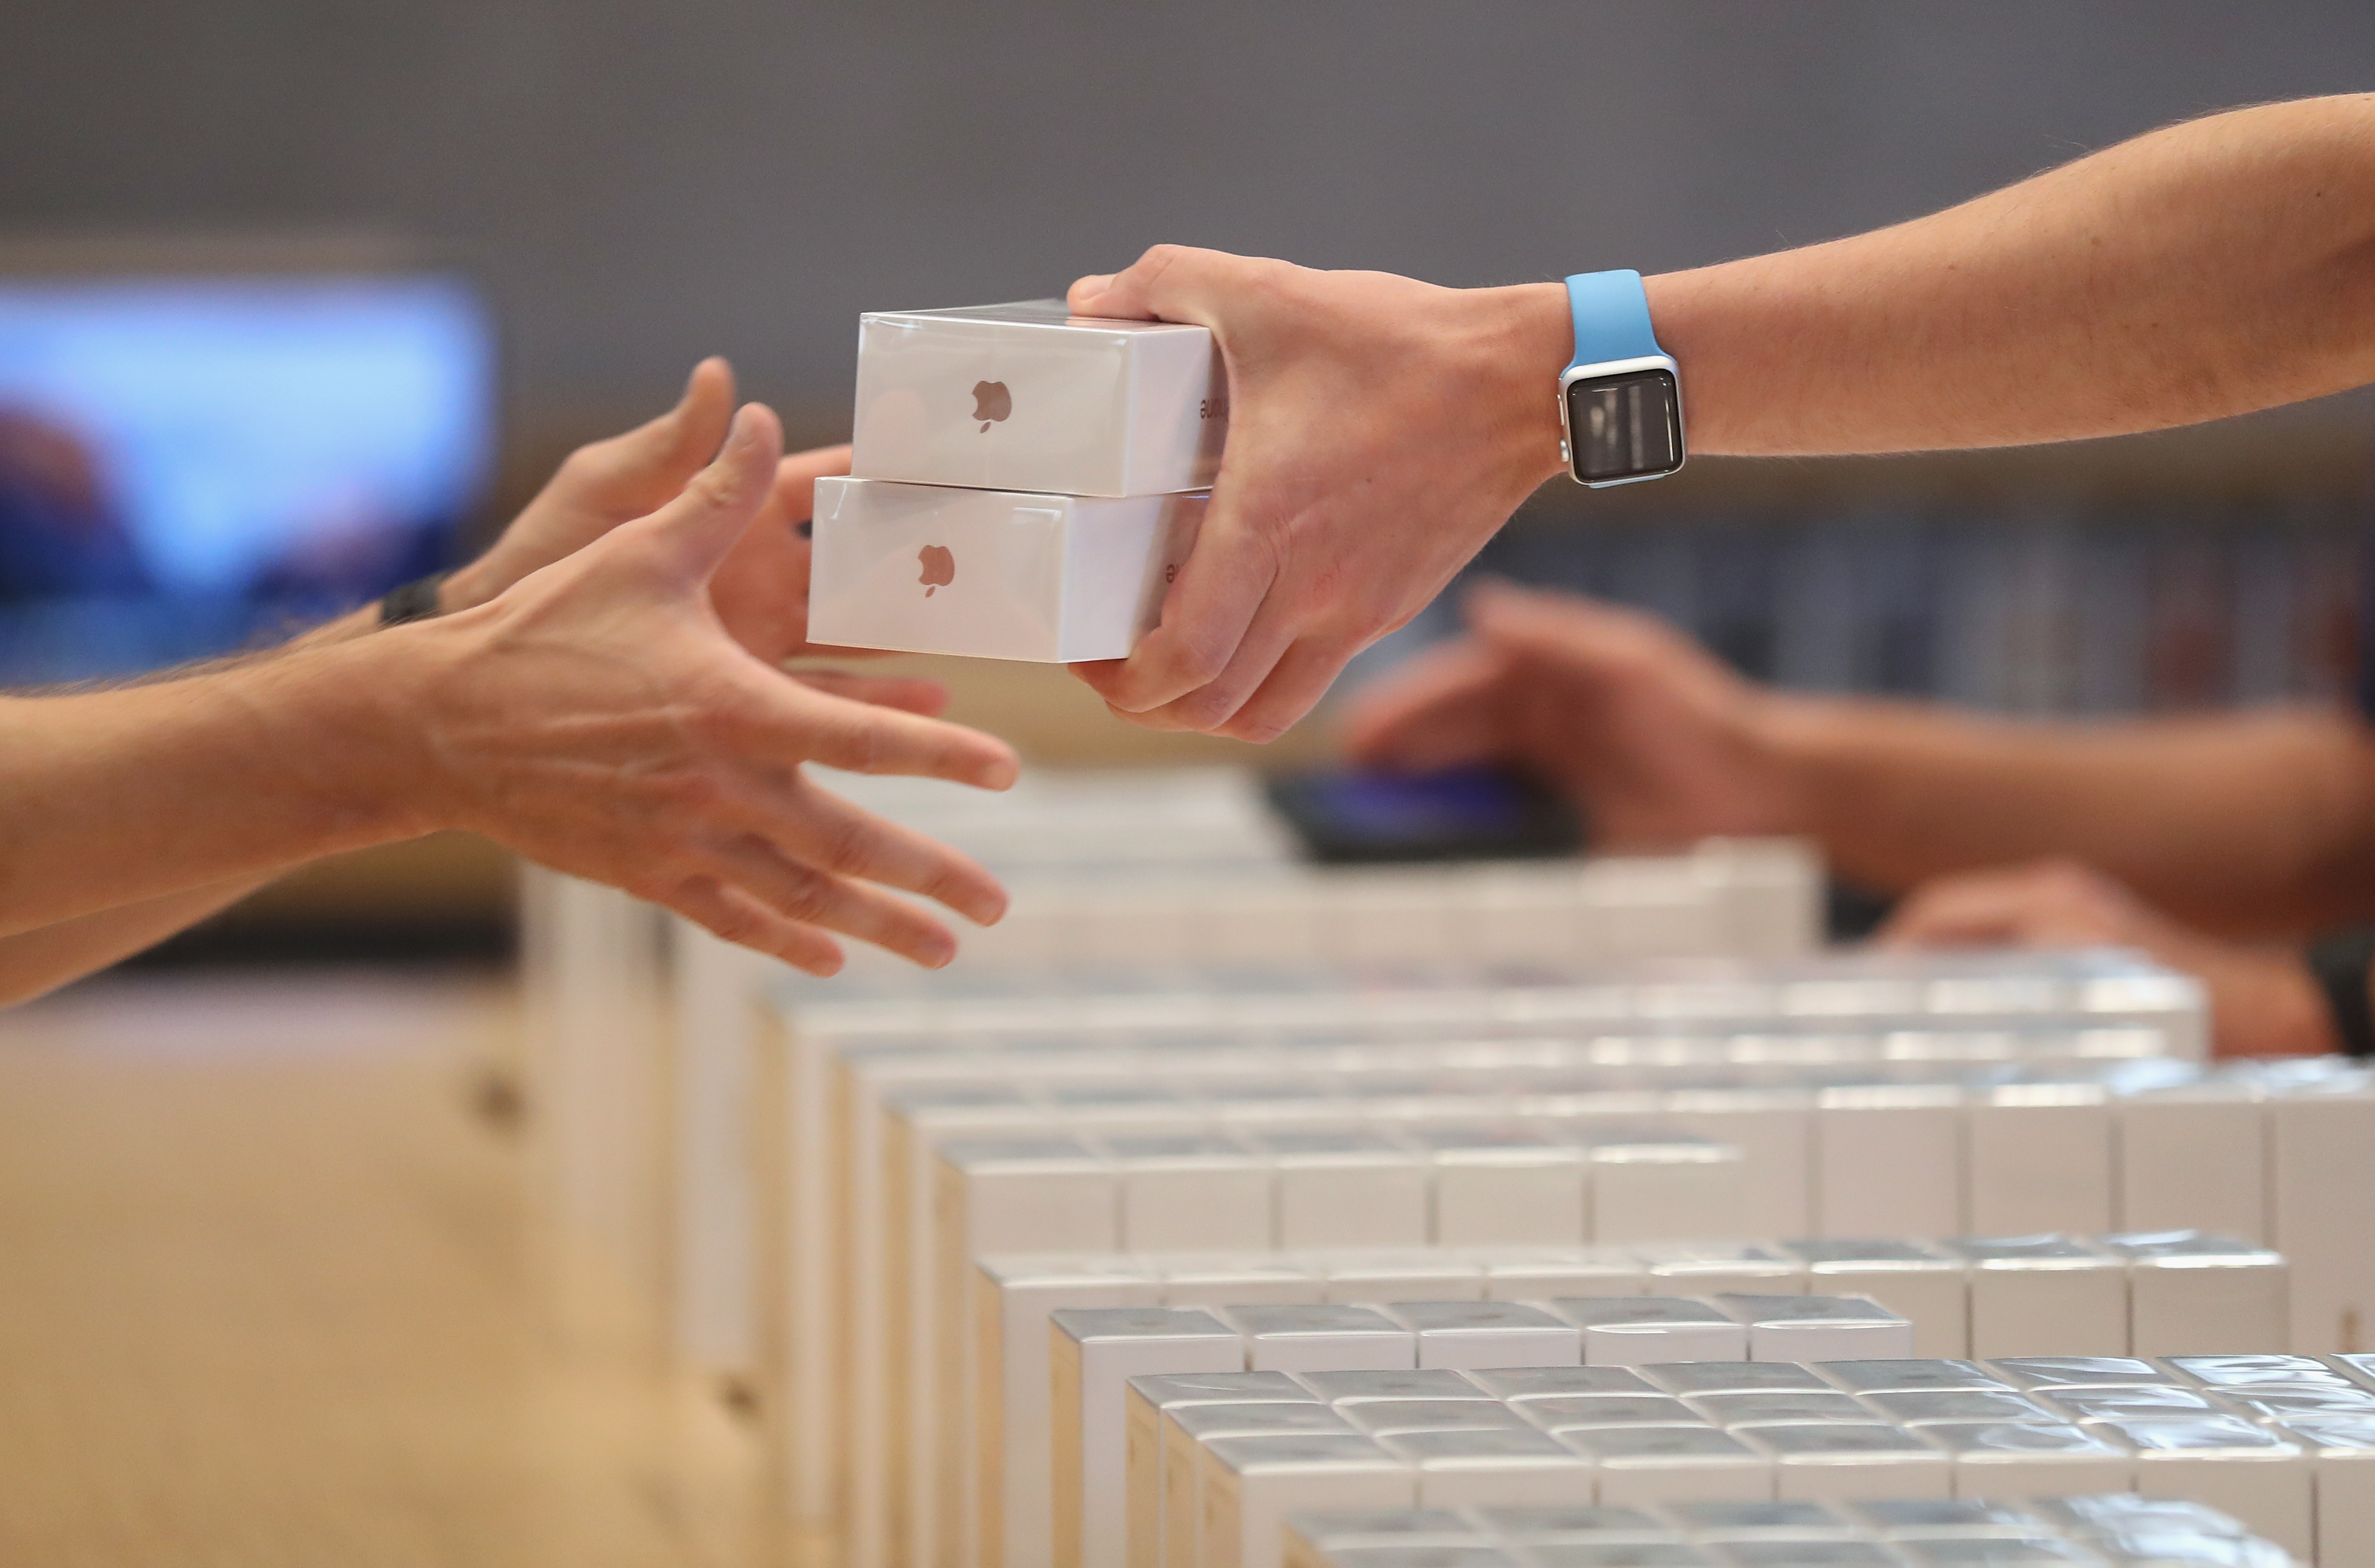 Apple Expects Supply Shortages to Slash Sales by Up to $8 Billion